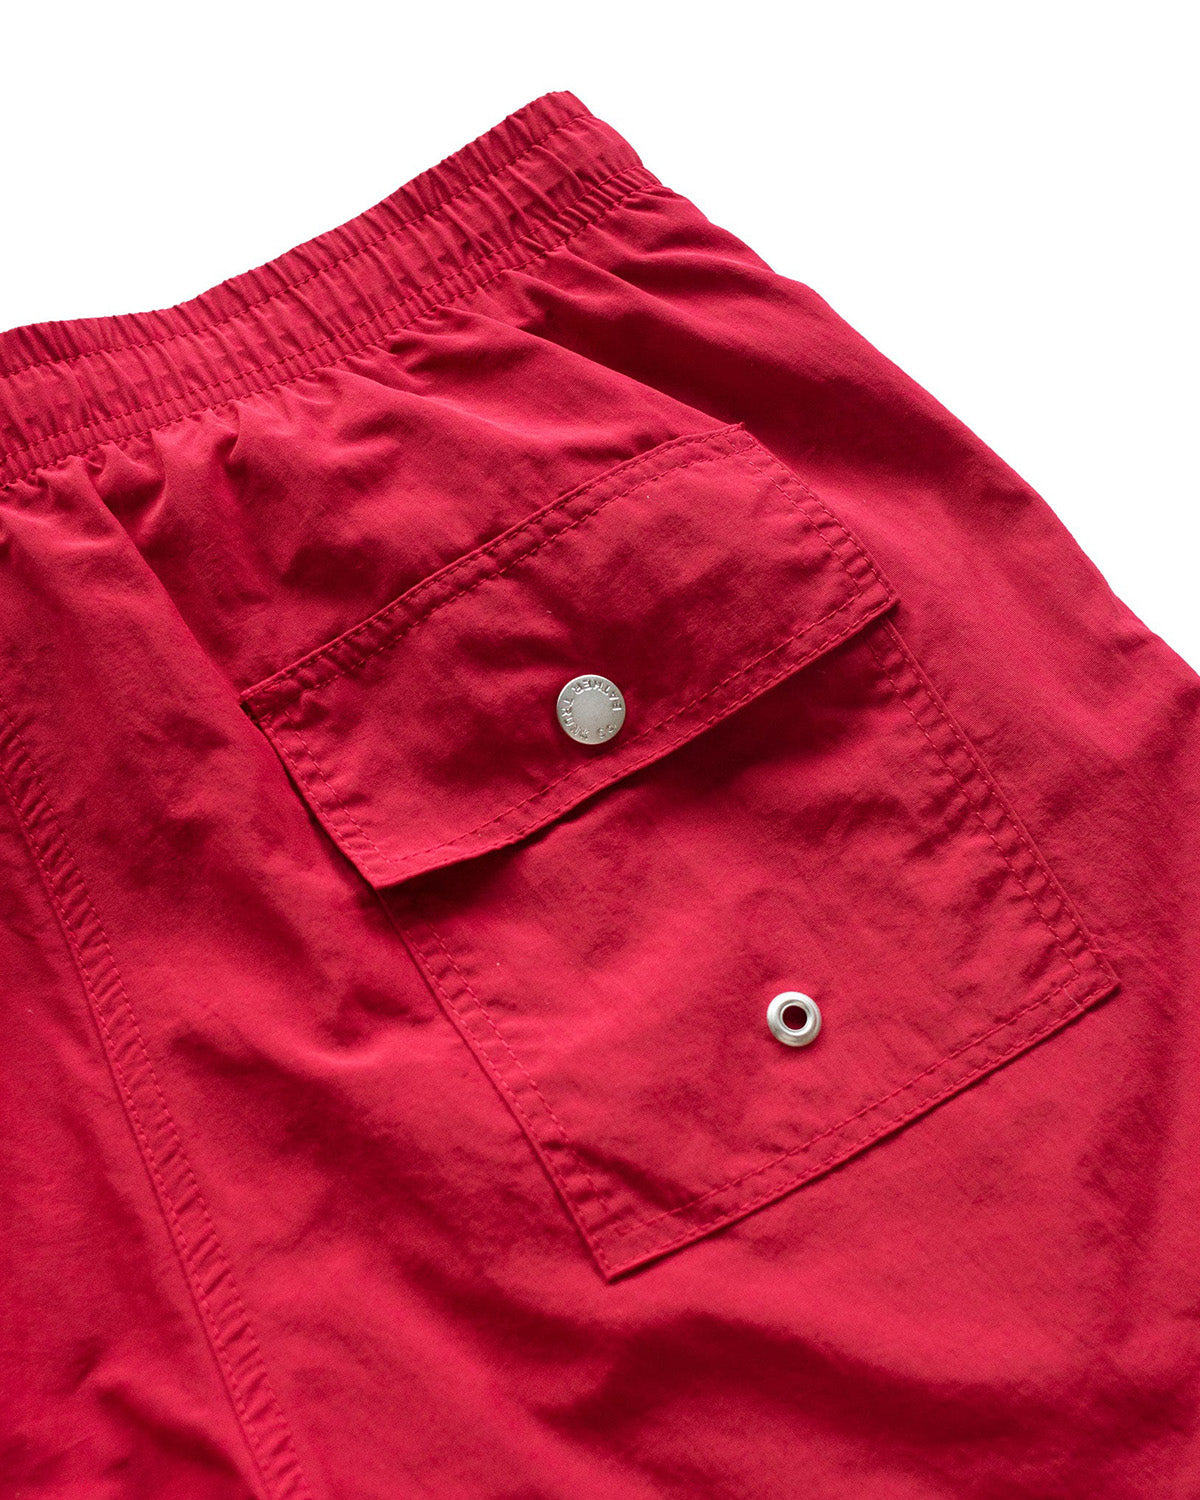 Solid Red Swim Trunk close up